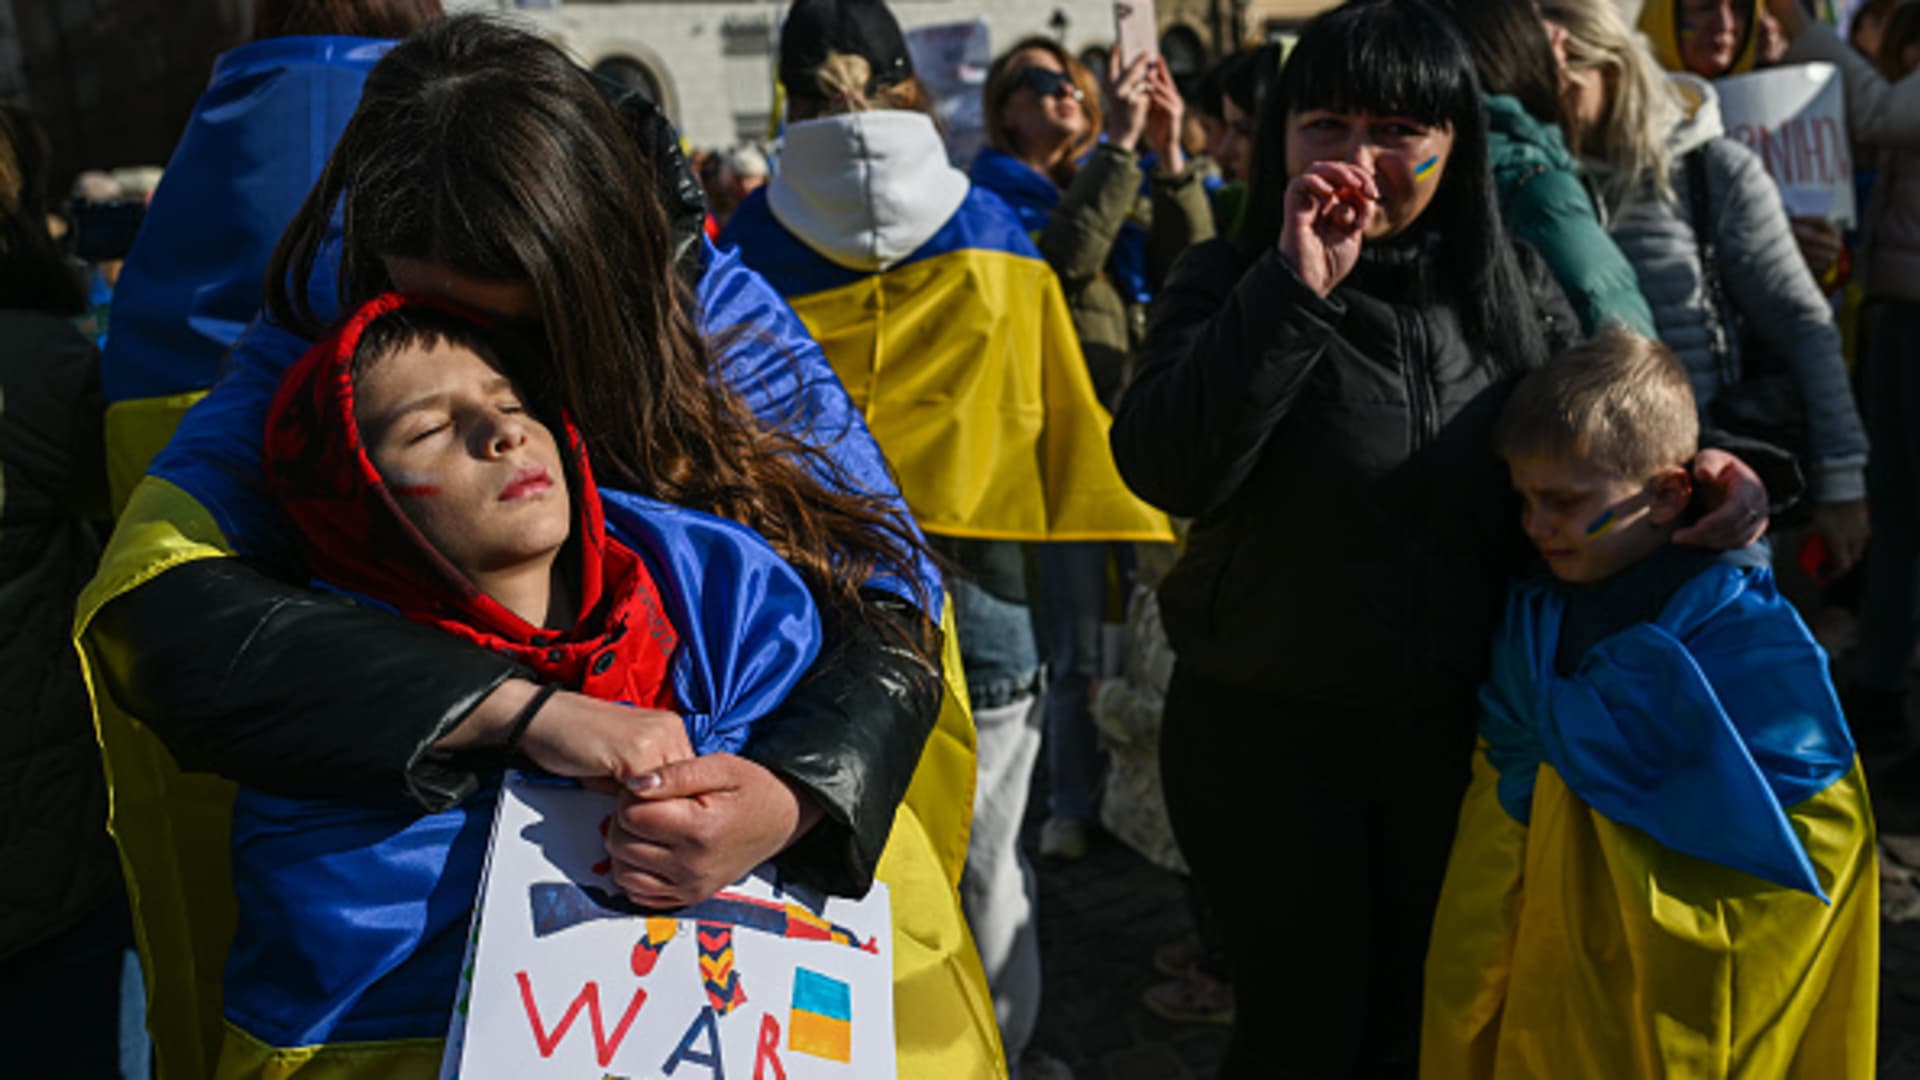 A Ukrainian mother draped in the national flag hugs her son during a peaceful protest against the killing of children by the Russian army during the invasion of Ukraine on April 10, 2022, in Krakow, Poland.